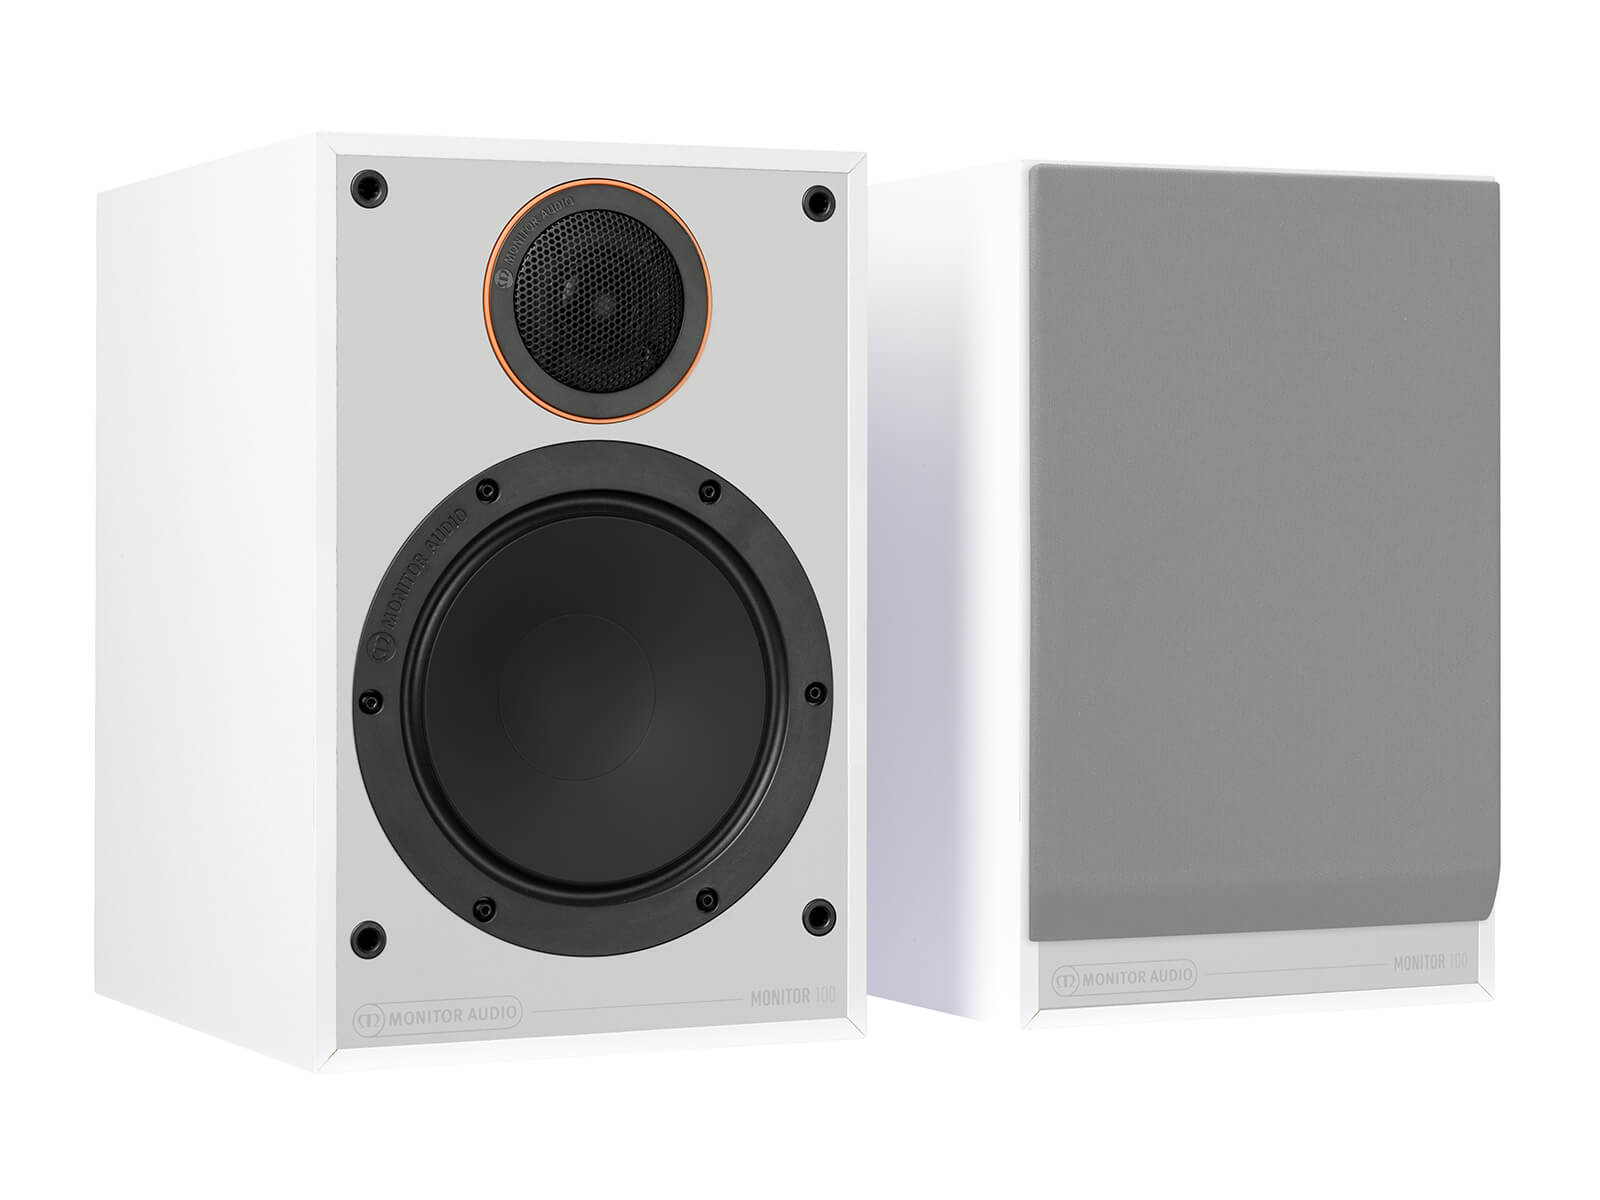 Monitor 100, bookshelf speakers, with and without grille in a white finish.